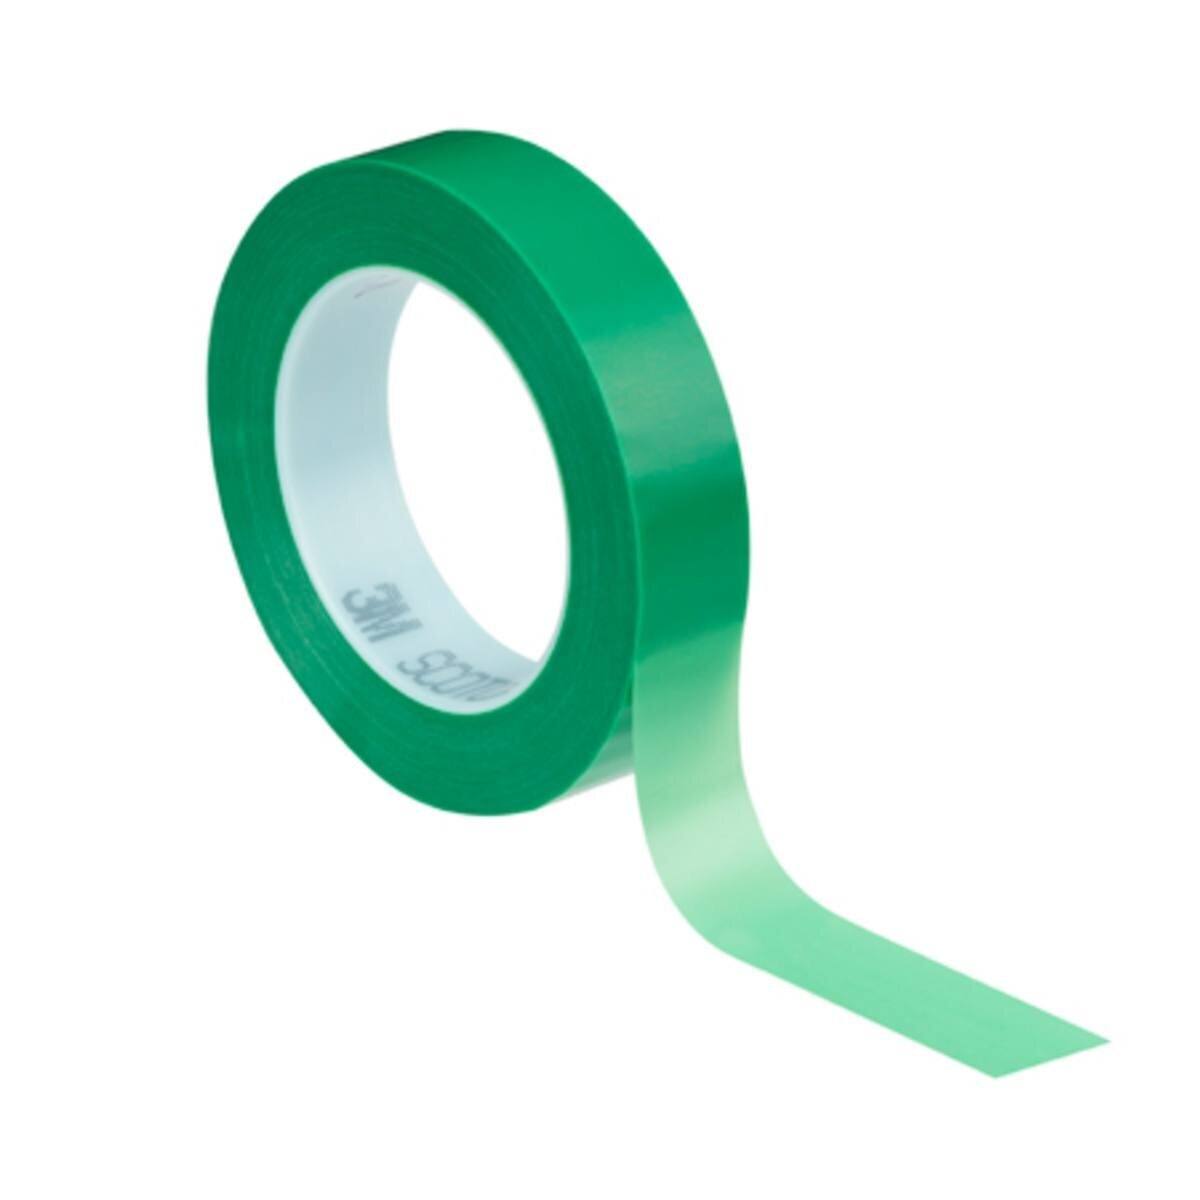 3M high temperature polyester adhesive tape 851, green, 50.8 mm x 66 m, 101.6 µm